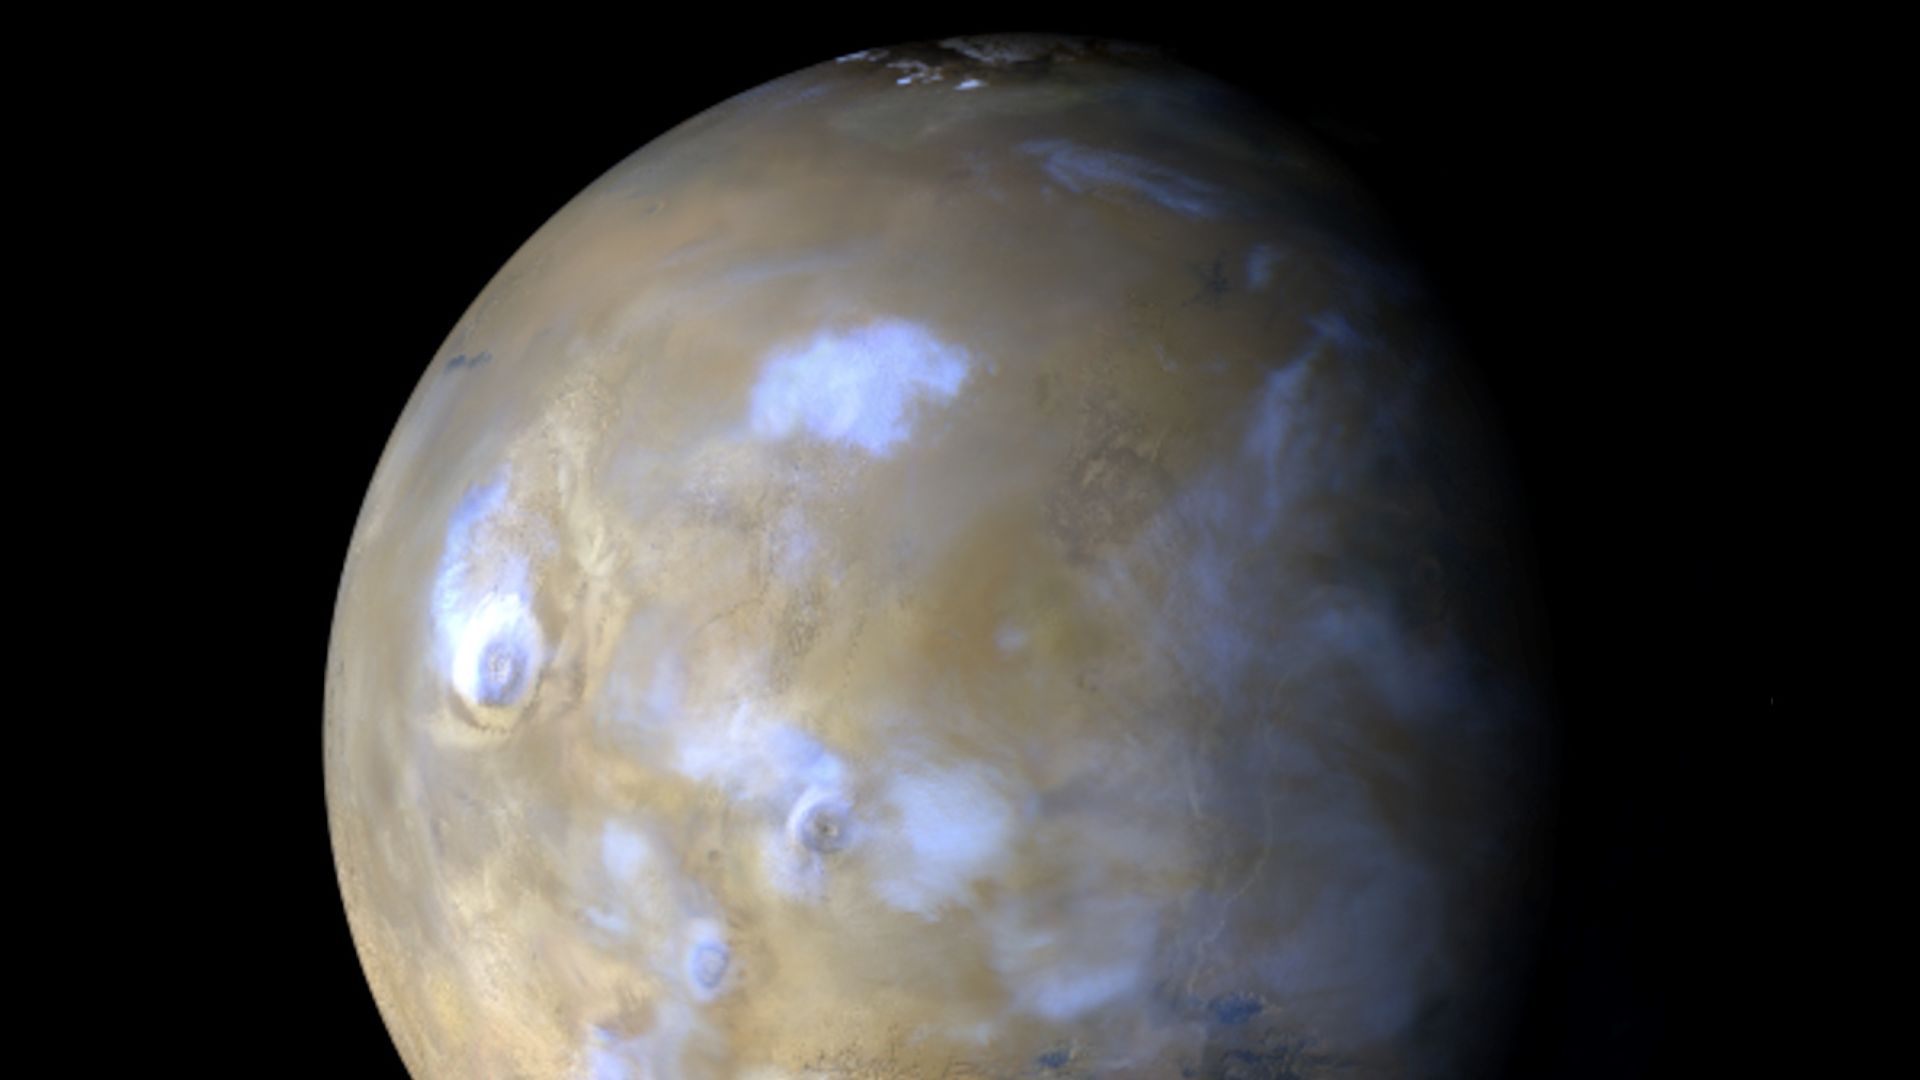 A full view of Mars and its storm clouds